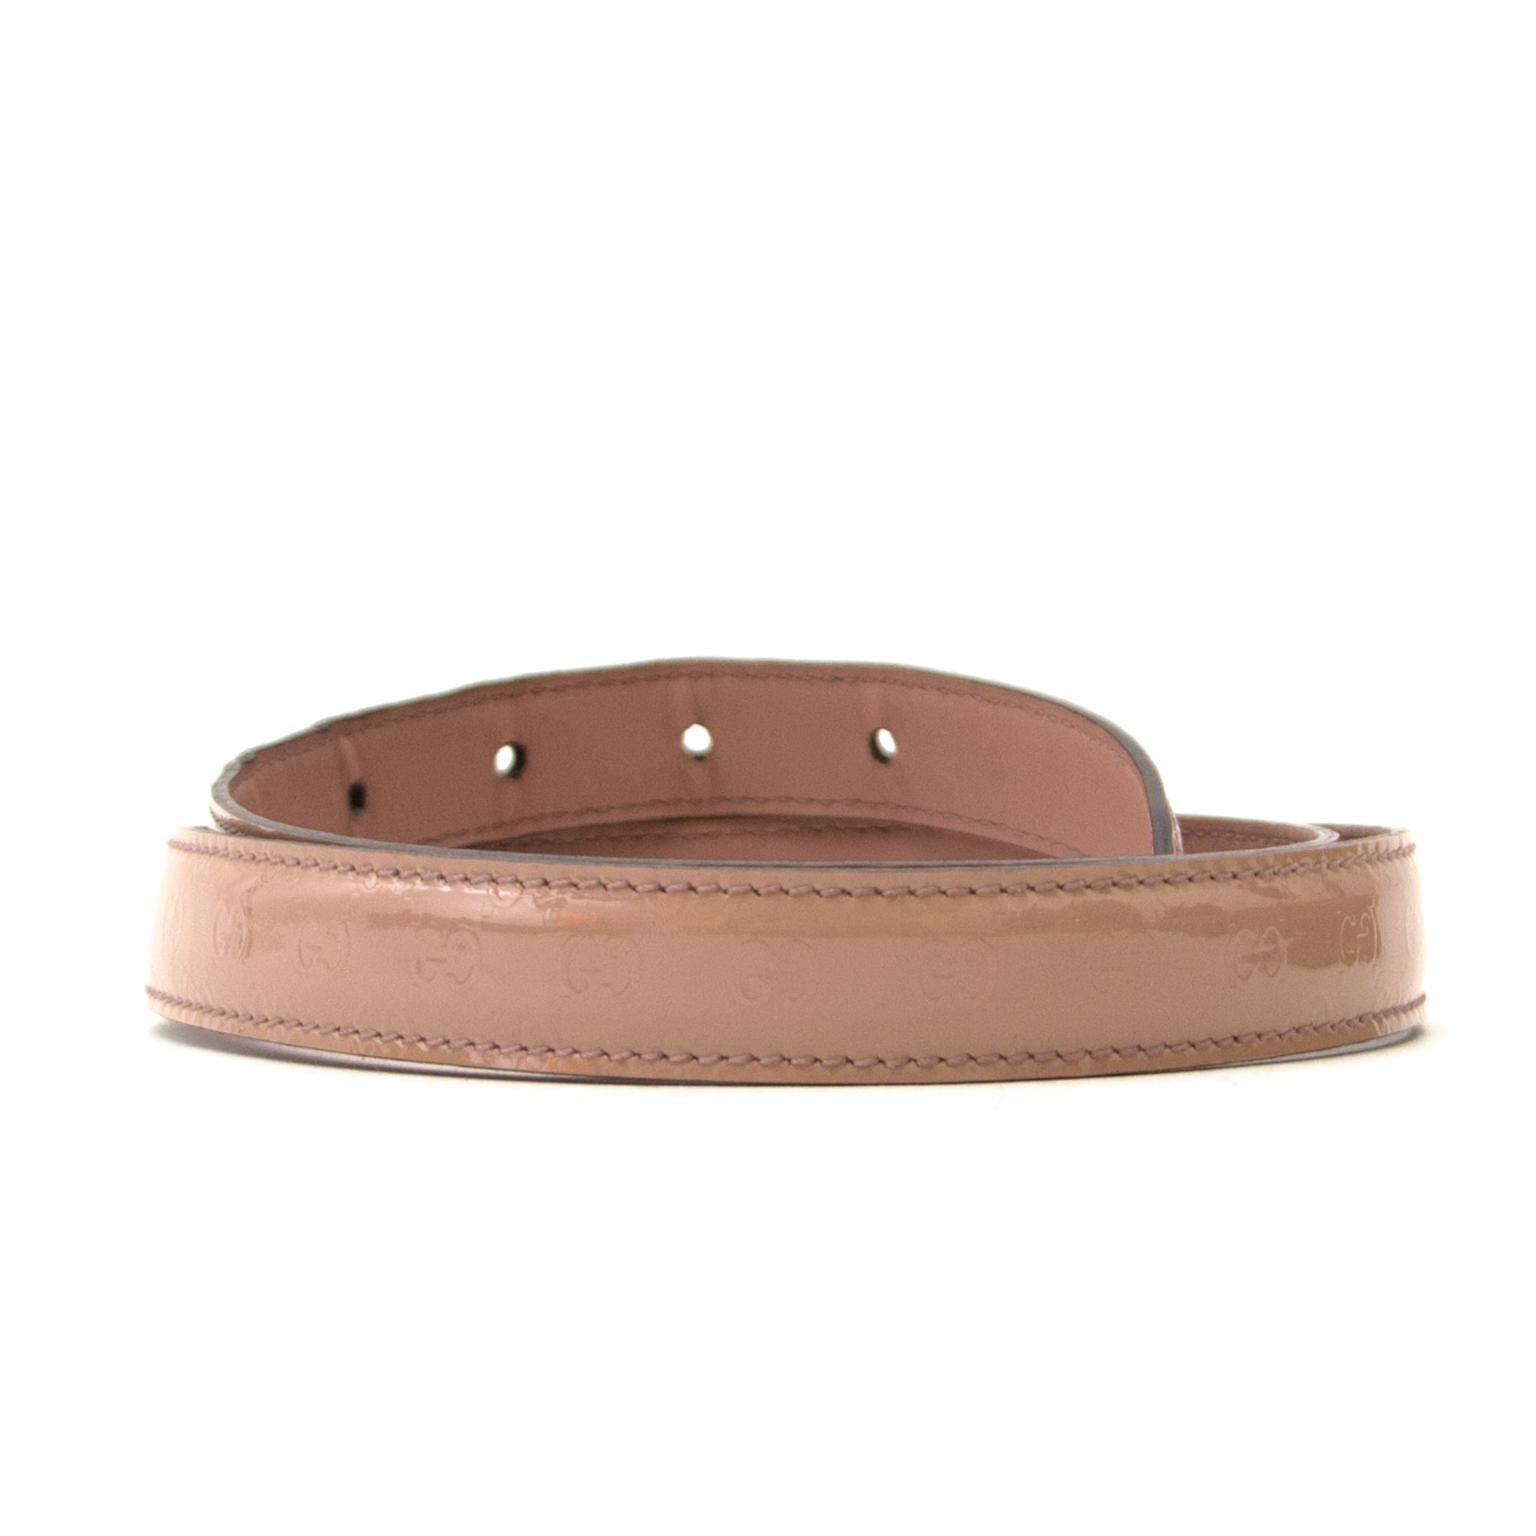 Very good condition

Gucci Patent Blush Monogram Belt - Size 85

This gorgeous Gucci belt is made from blush patent leather with subtle Gucci monogram. The buckle has a gold-tone color. 

You can find beauty in its simplicity... This belt will